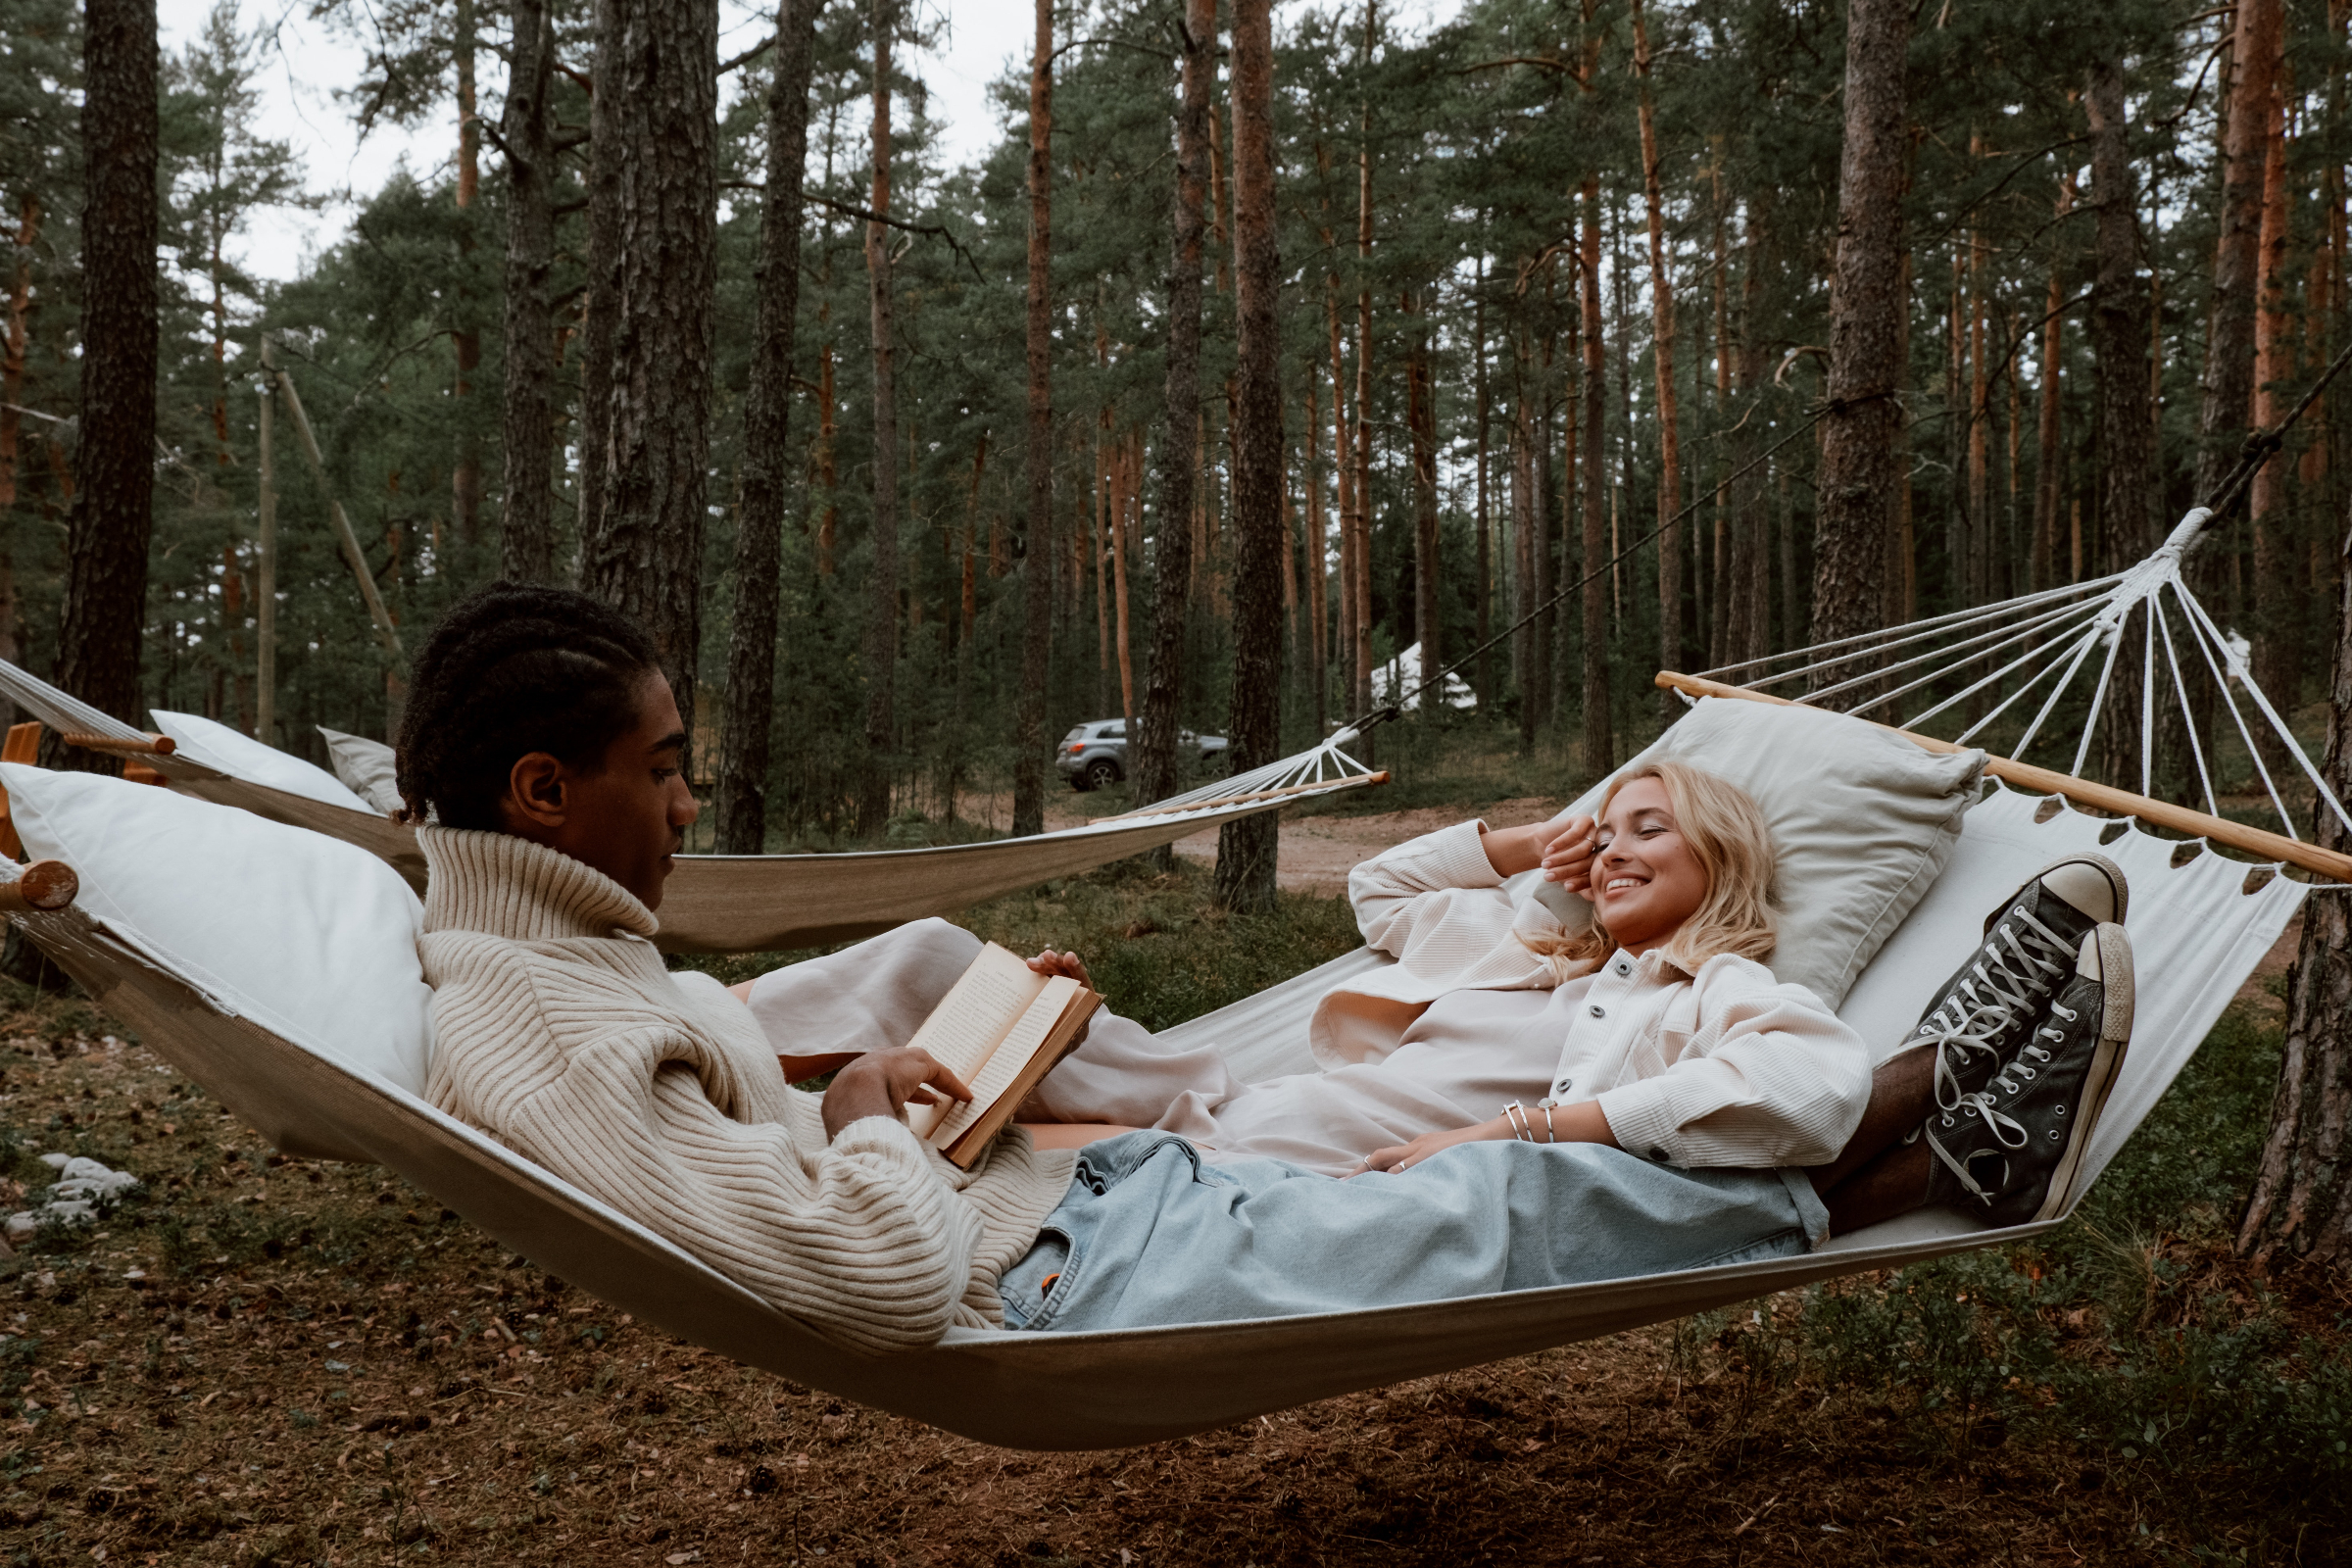 A couple lying in a hammock together. | Source: Pexels